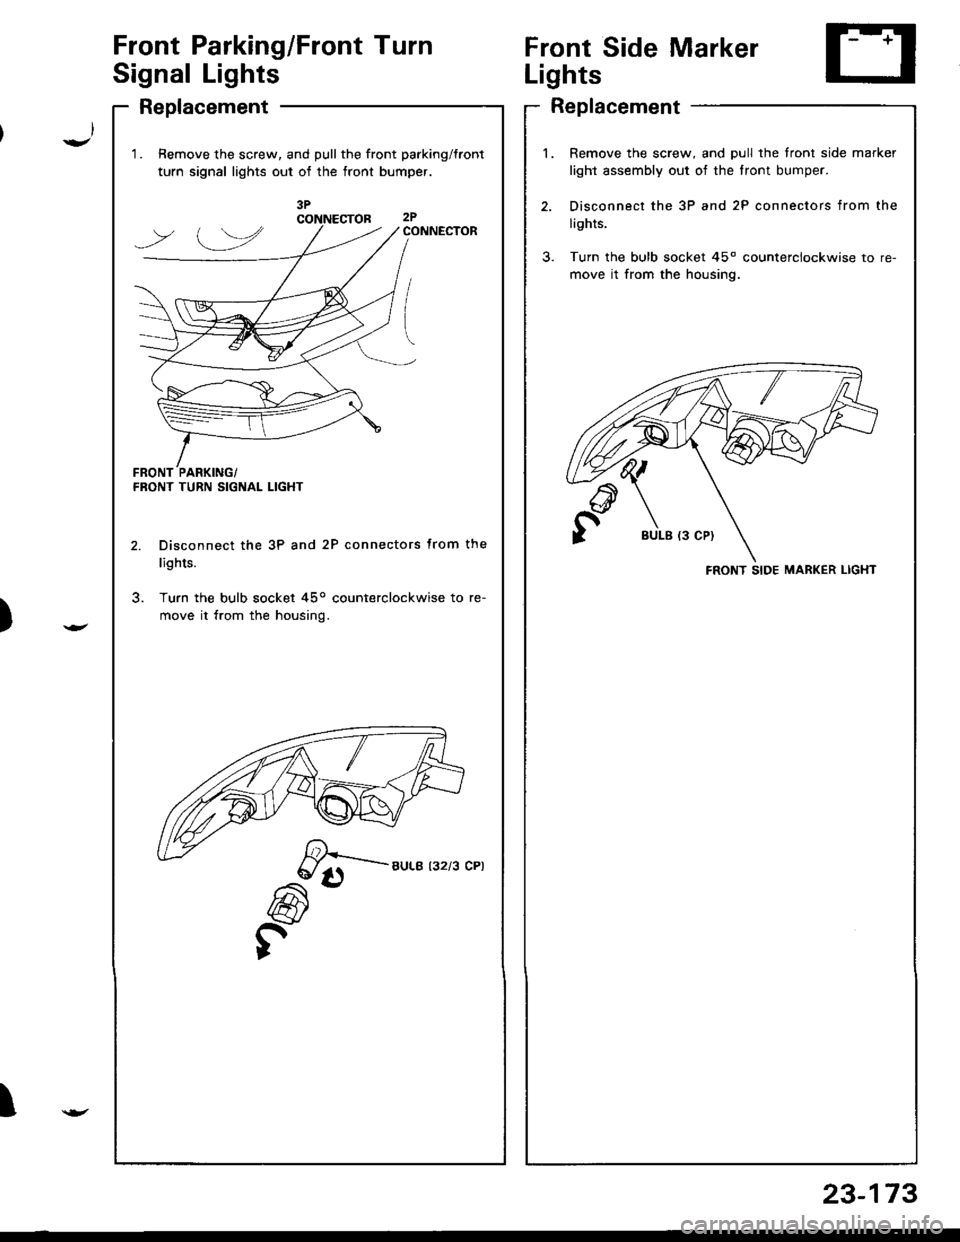 HONDA INTEGRA 1998 4.G Workshop Manual )
I
Front Parking/Front Turn
Signal Lights
Replacement
1.Remove the screw, and pull the front parking/tront
turn signal lights out of the front bumper.
CONNECTOR
l.
FRONT TURN SIGNAL LIGHT
Disconnect